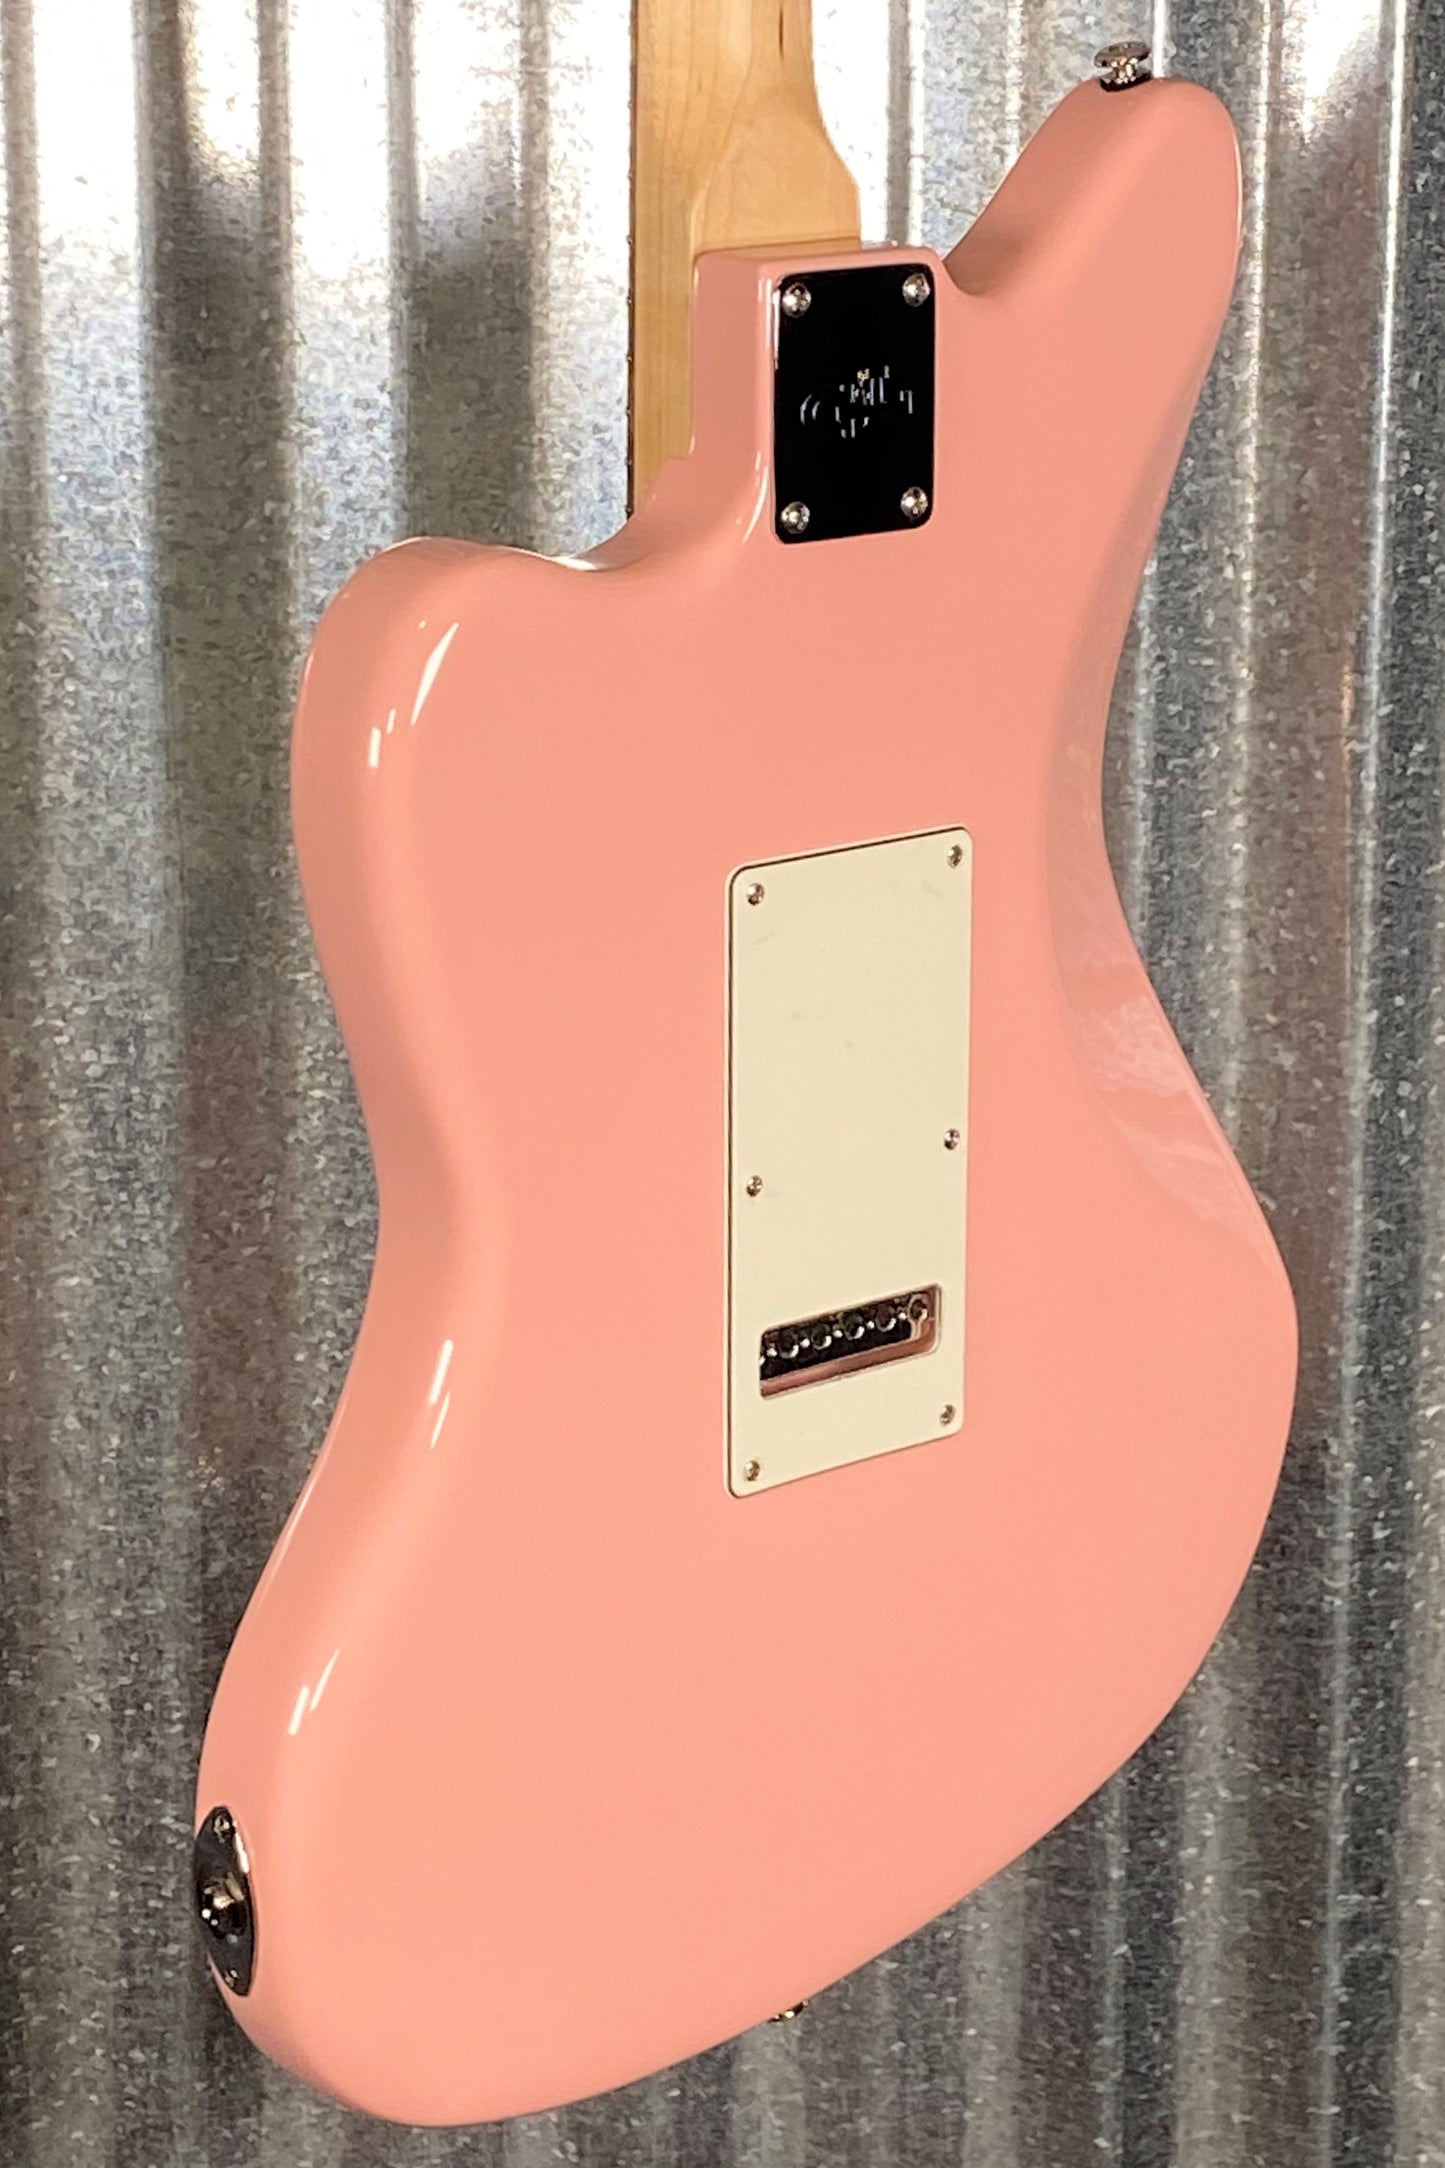 G&L USA Doheny Shell Pink Guitar & Case #7260